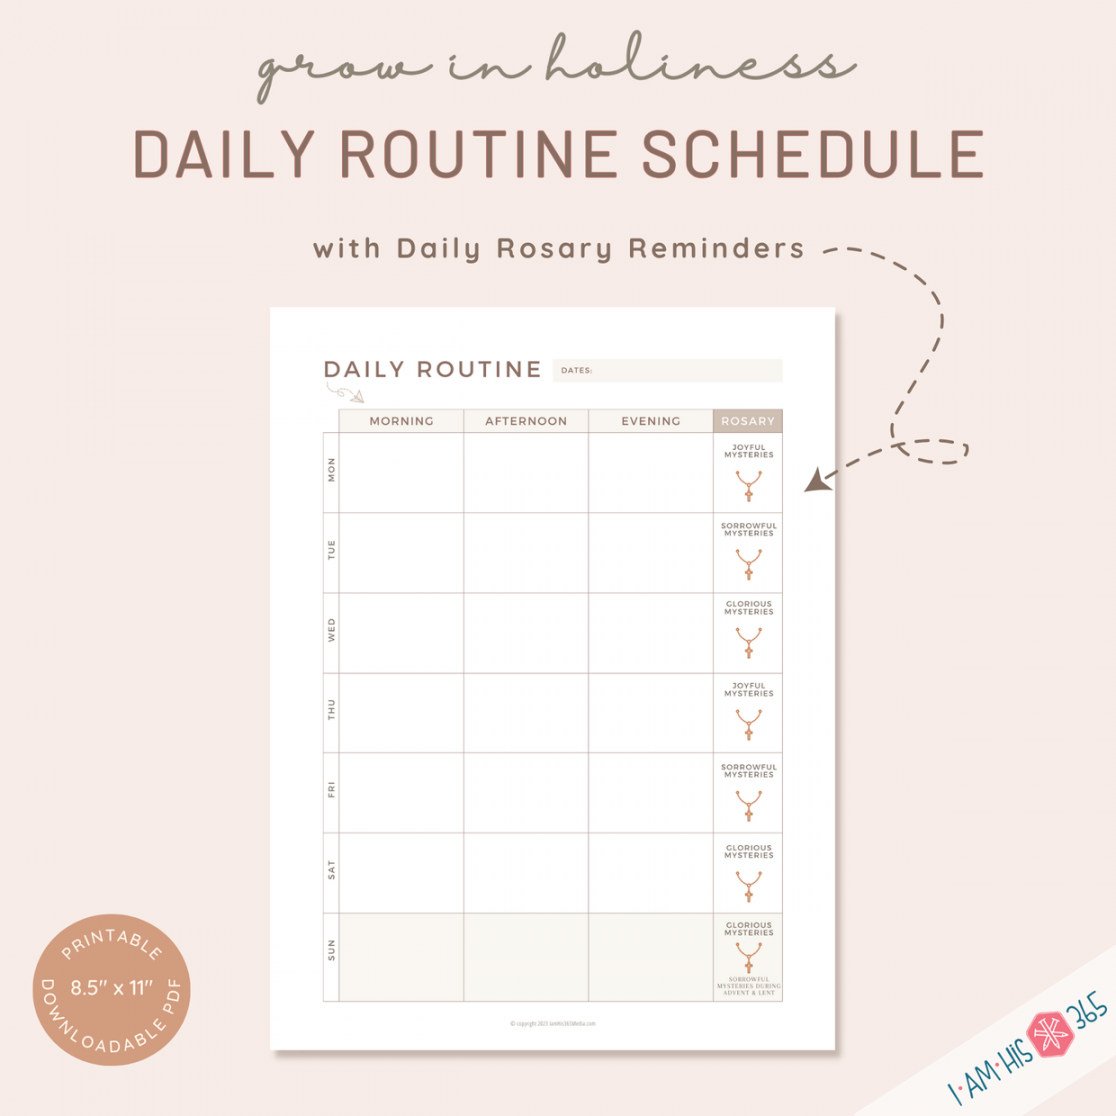 Printable Traditional Catholic Daily Planner & Prayer Packet  Printable  Planner  Journal , Planner